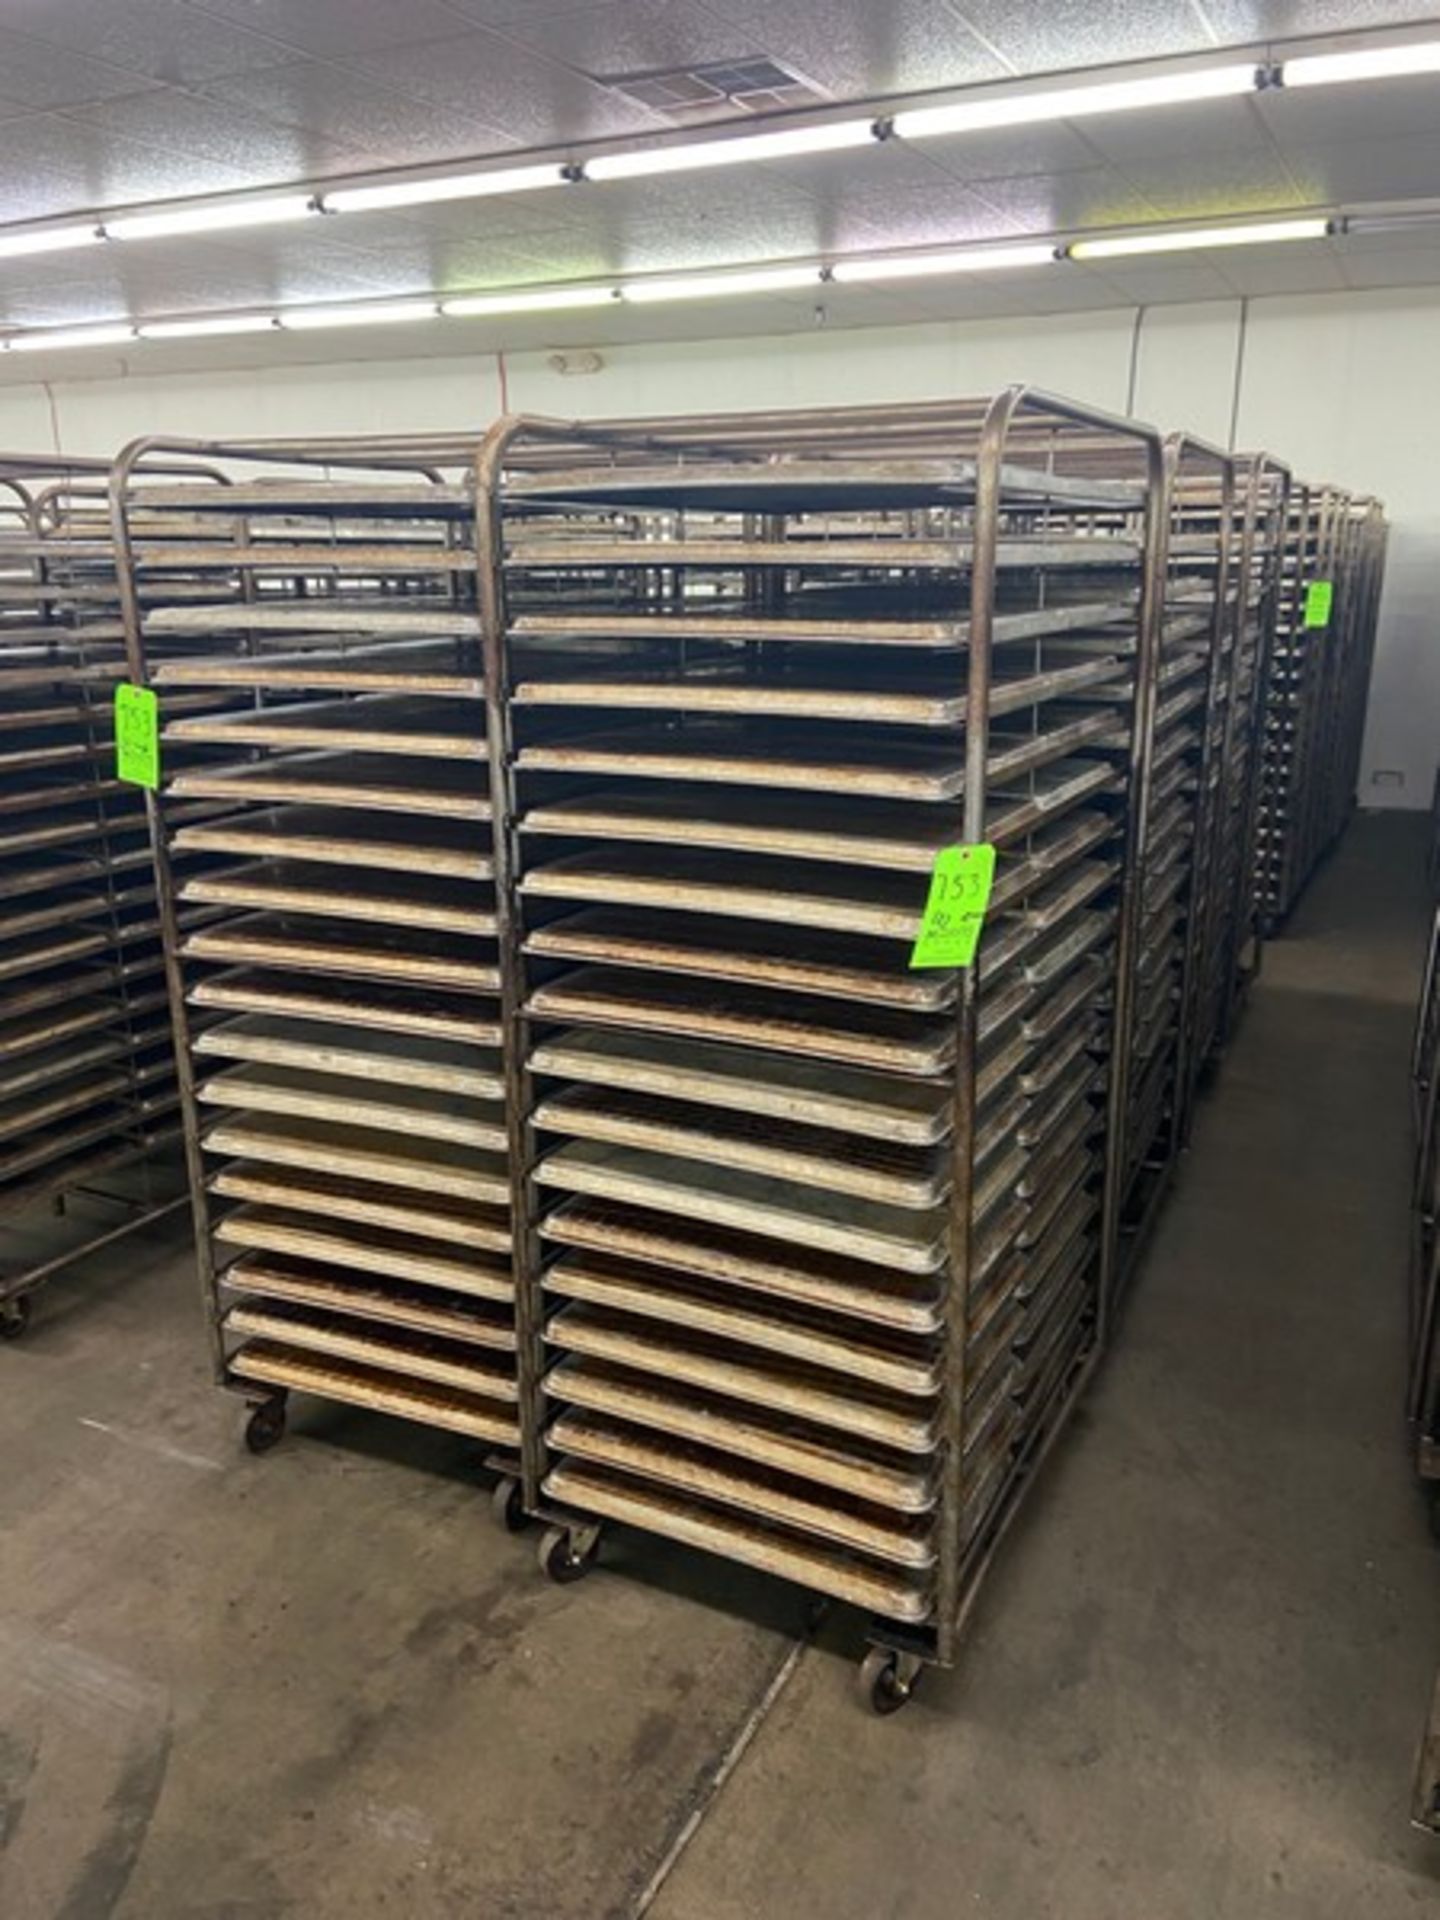 (8) PORTABLE DOUBLE SIDED BAKING PAN RACKS, MOUNTED ON CASTERS (LOCATED IN HERMITAGE, PA)